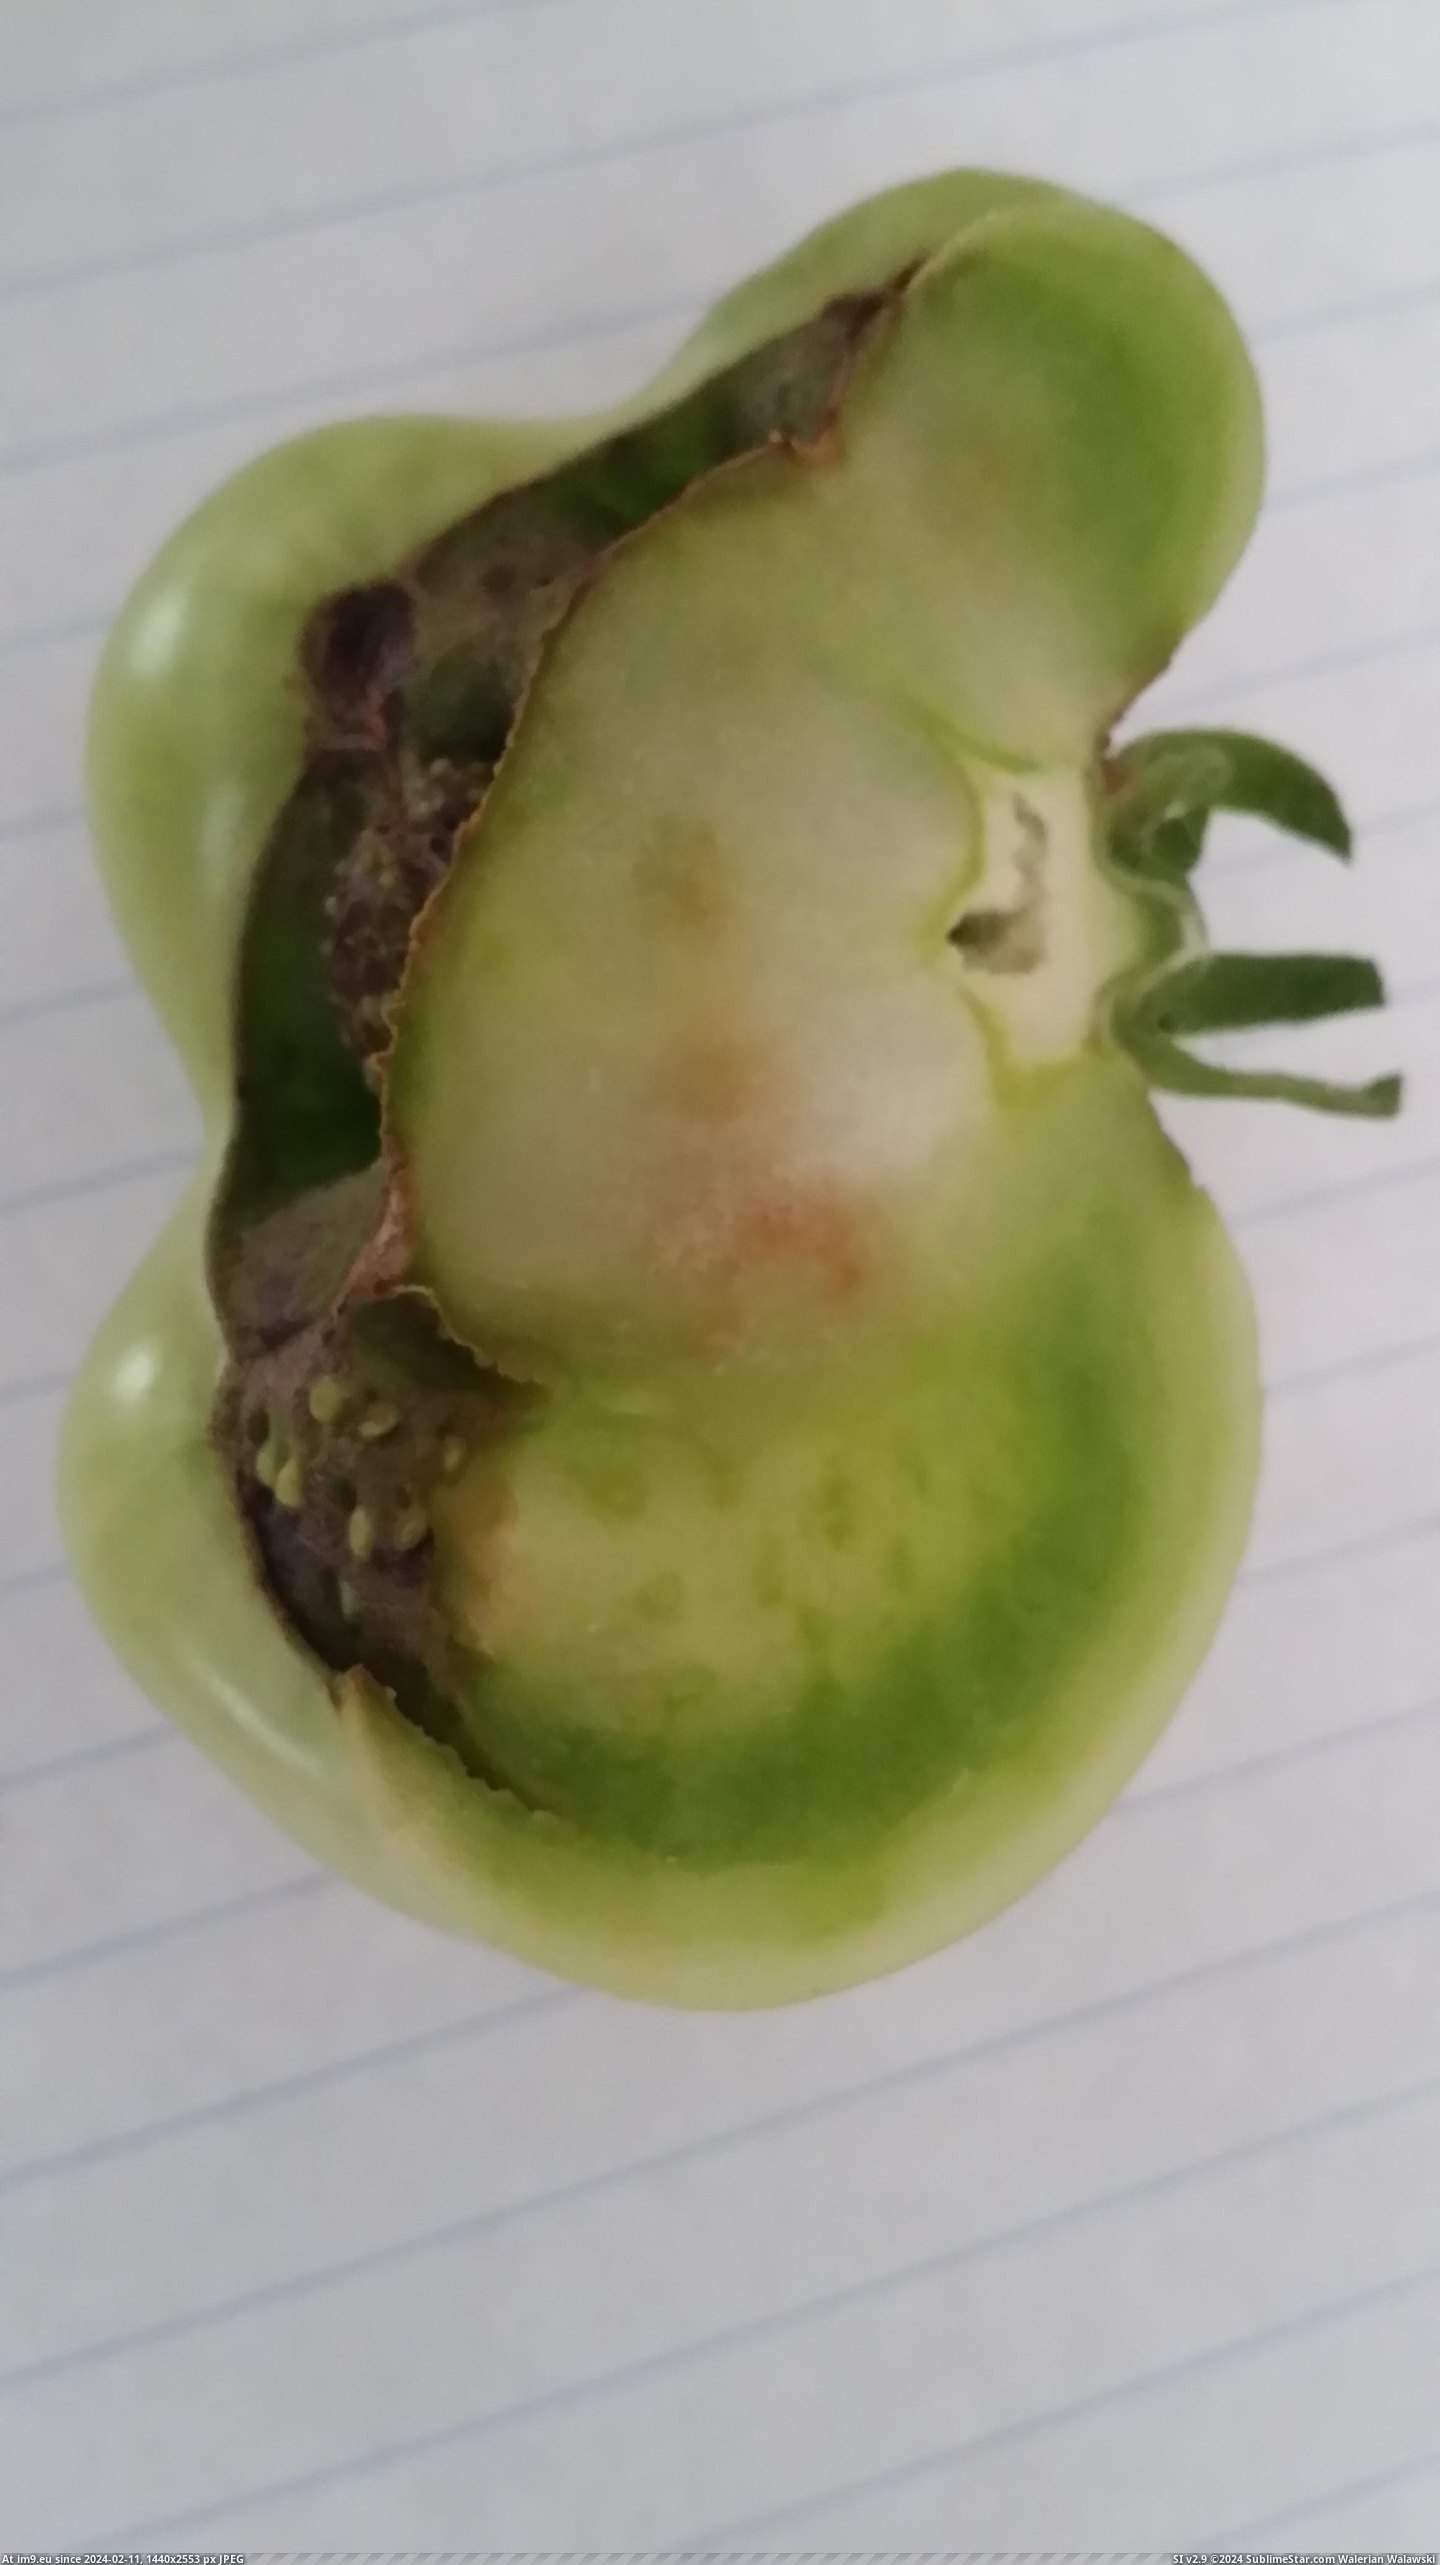 #Created #Strawberry #Hybrid #Fused #Tomato #Seeds [Mildlyinteresting] Our tomato seeds fused with our strawberry seeds and created a hybrid 1 Pic. (Image of album My r/MILDLYINTERESTING favs))